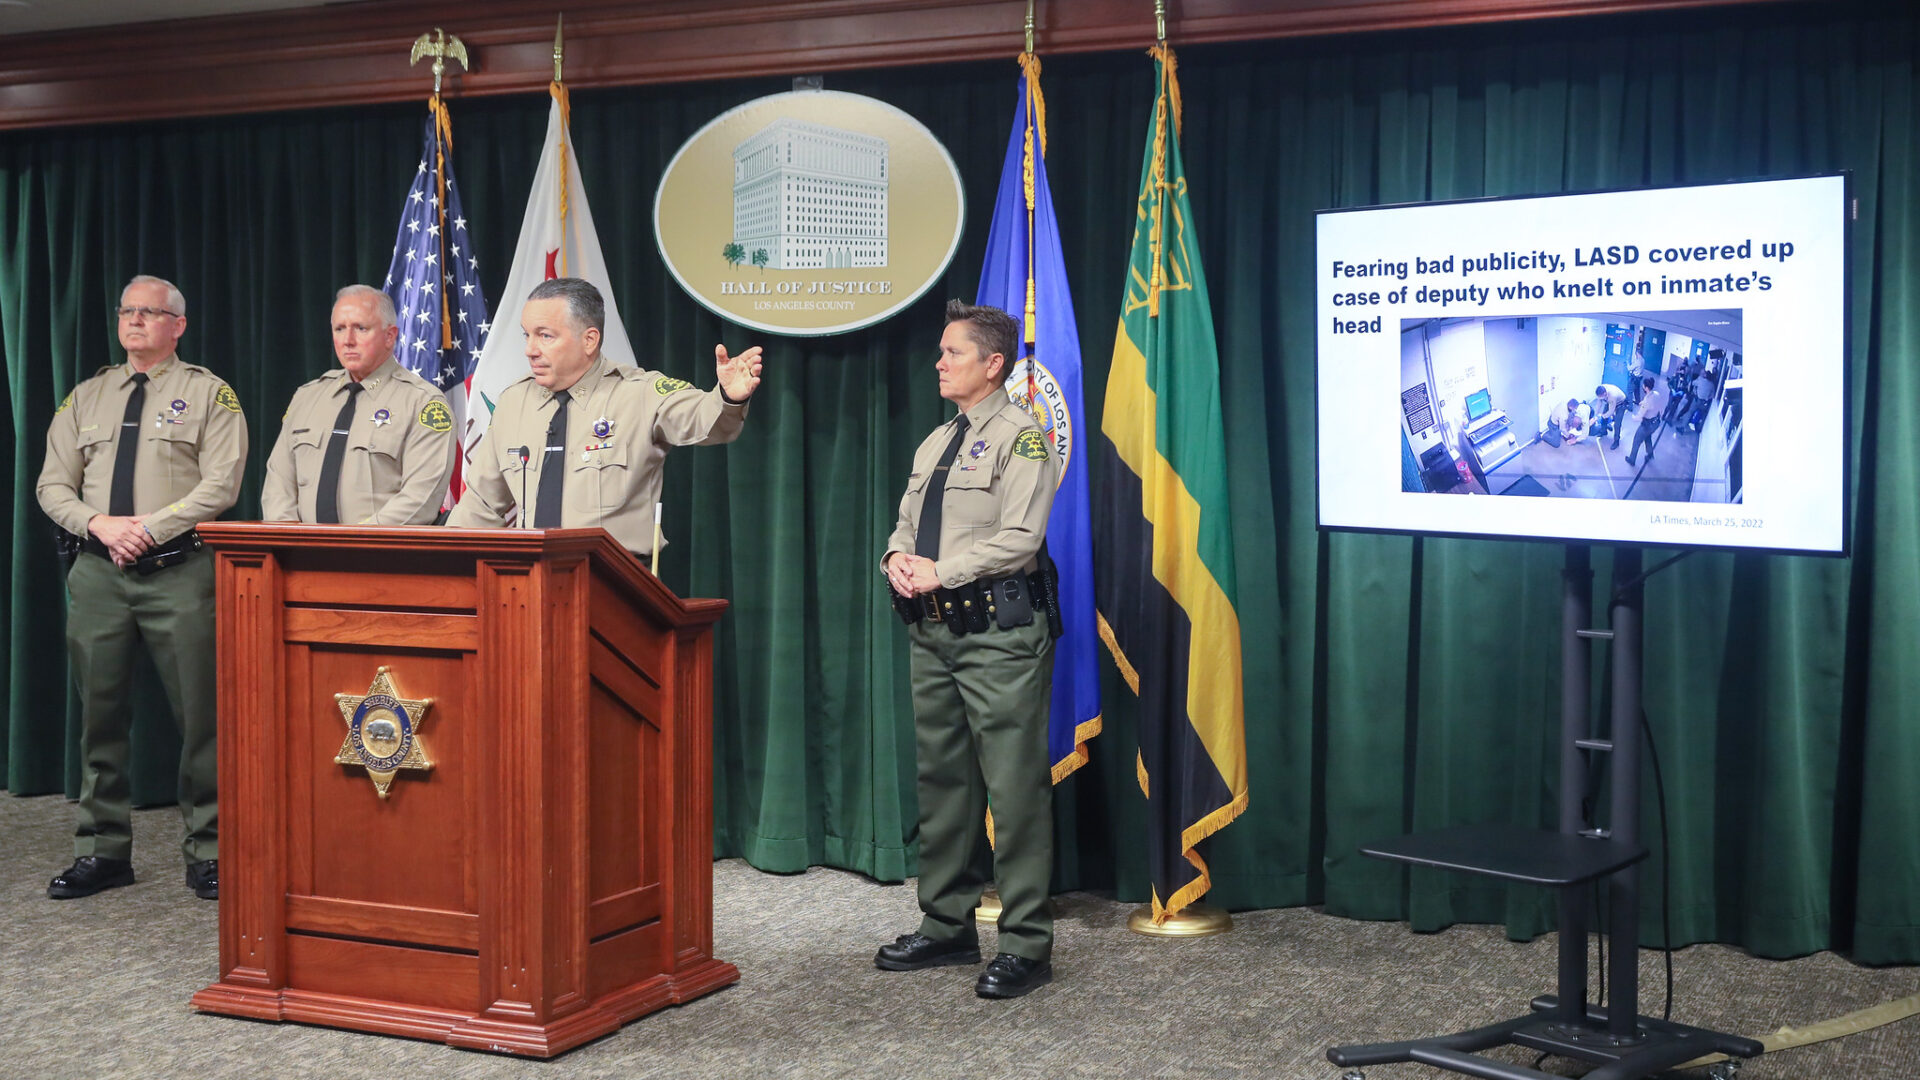 Sheriff Alex Villanueva is in a tan and green uniform standing infront of a wooden podium with the Sheriff's badge attached to the front. he is pointing to a screen on his right. He has two of his assistant Sheriff's on his left and one assistant Serhiff on his right.